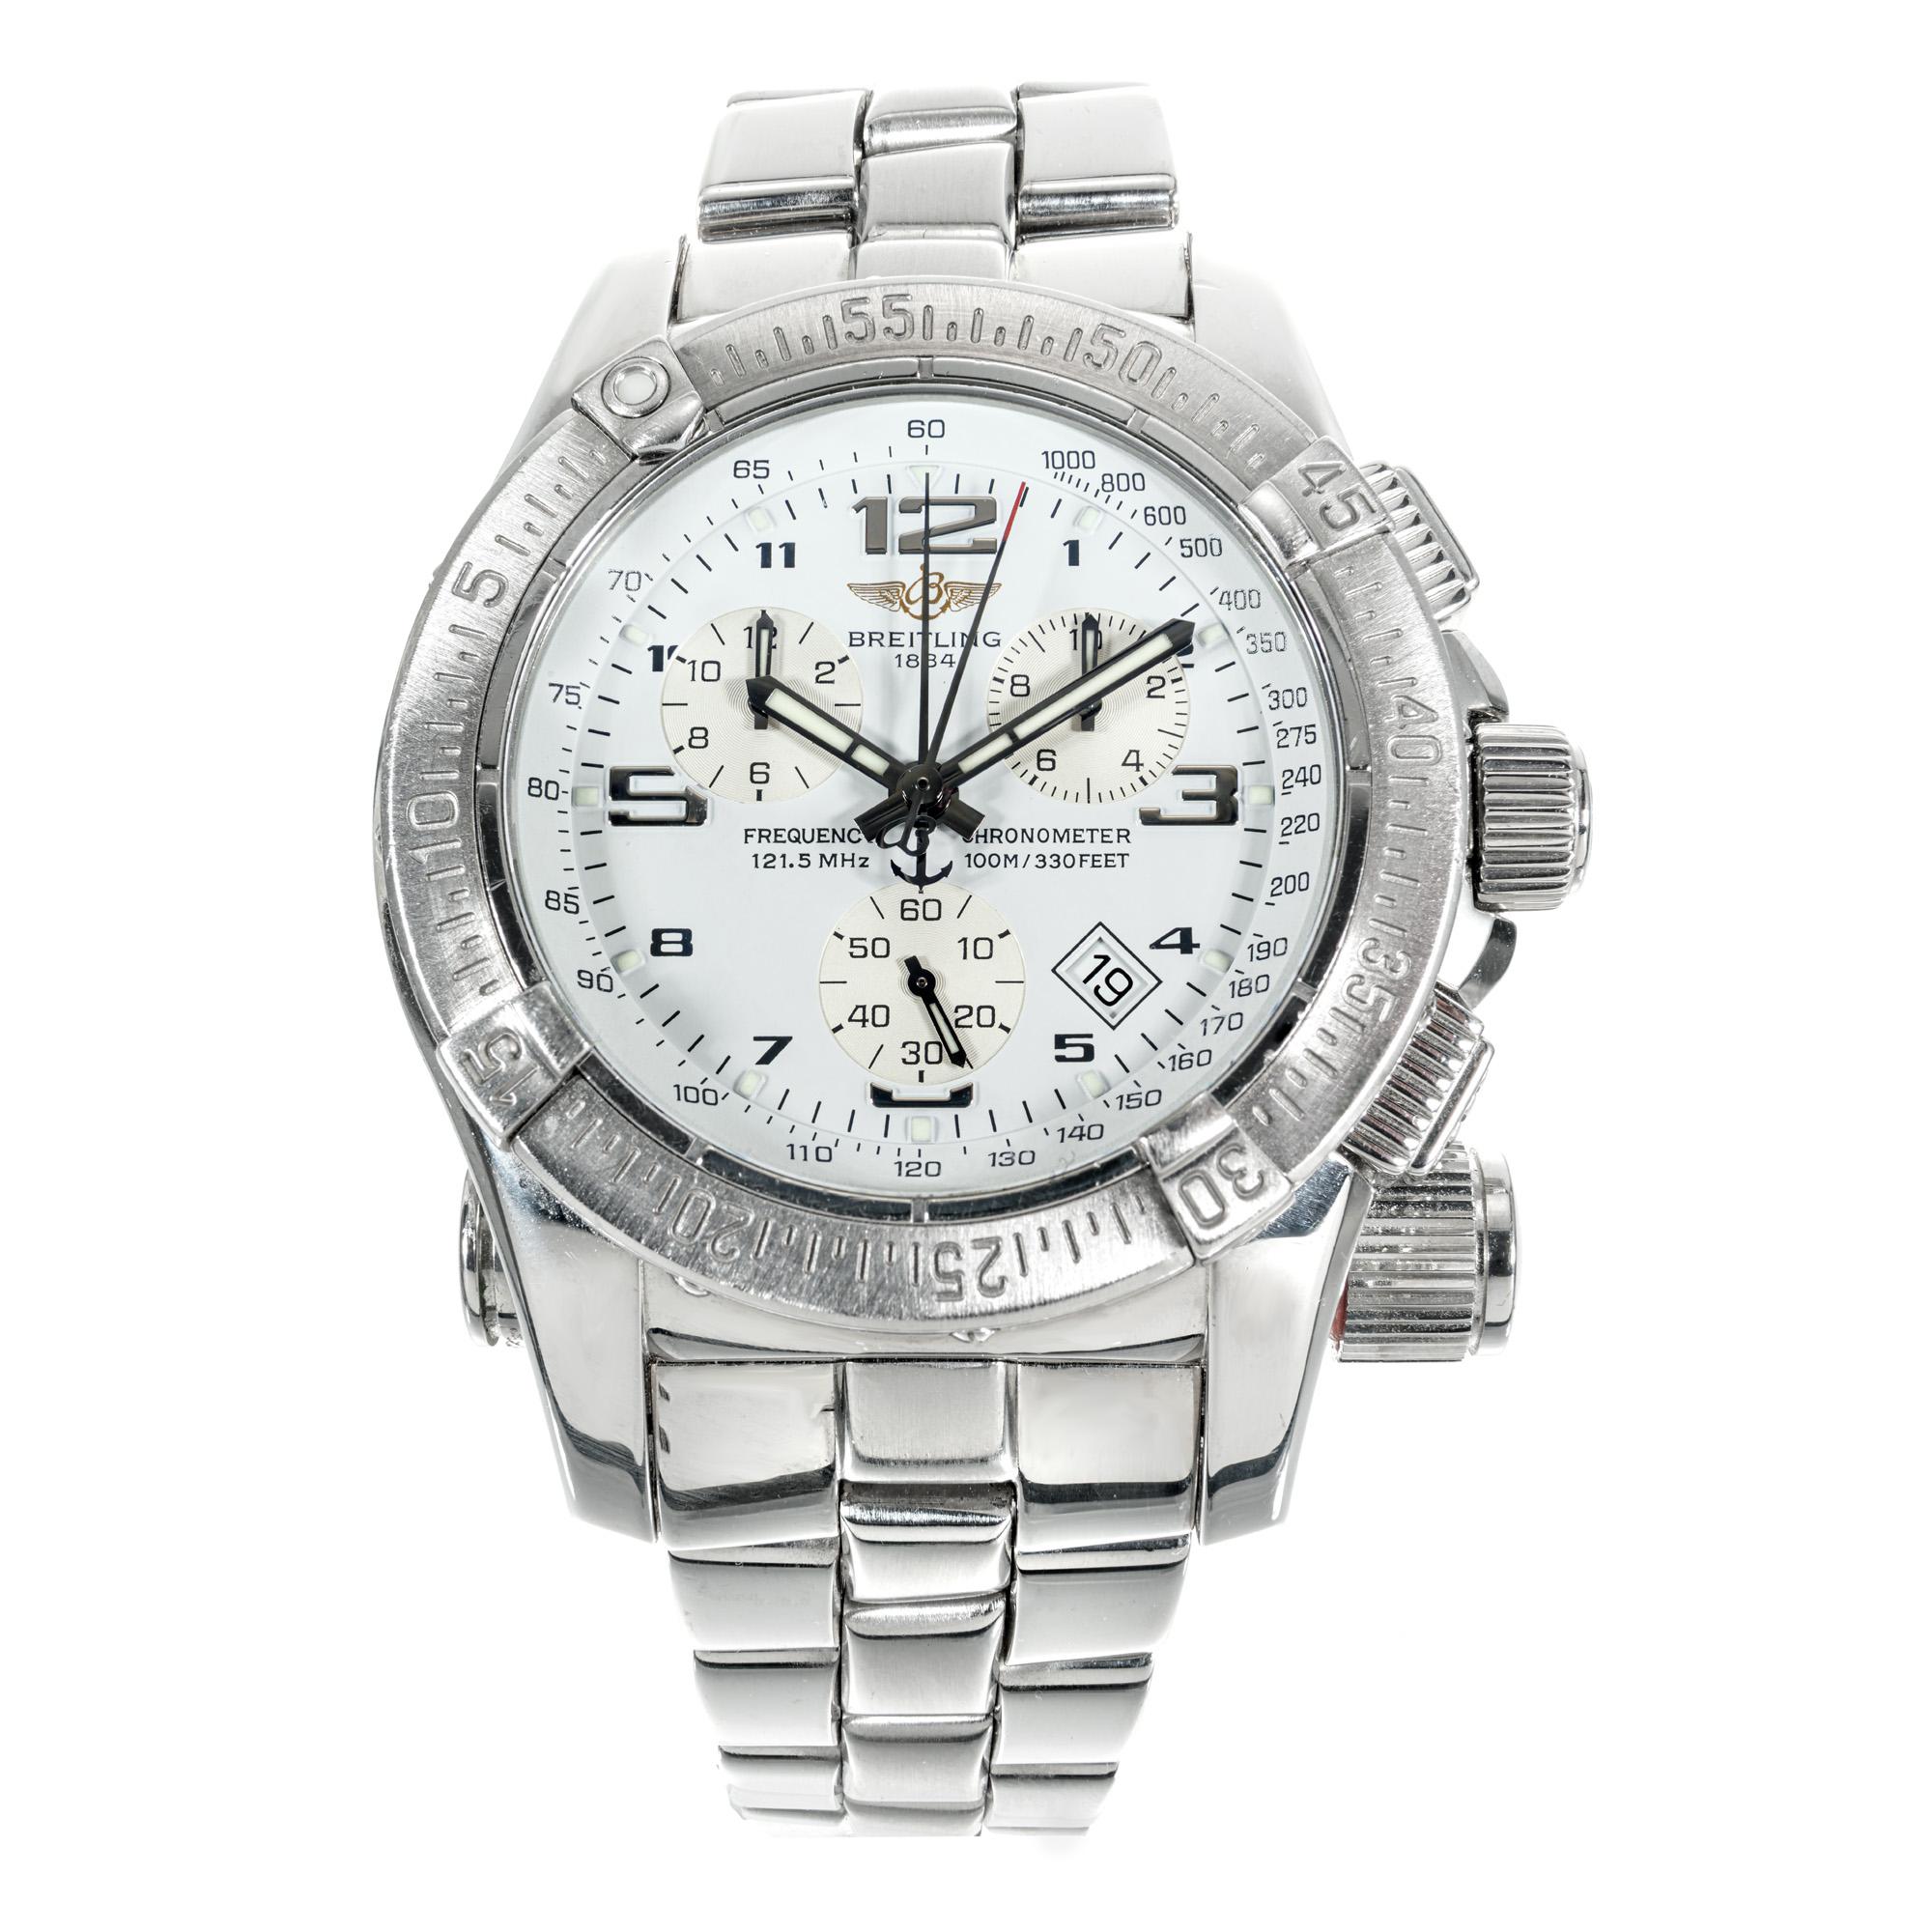 Breitling Emergency A73321 stainless steel with steel full length band. Day and Chronograph. Breitling model designed for pilots and leaders with an FAA registered transmitter that allows the FAA to locate the wearer when activated. 8.75 inches in